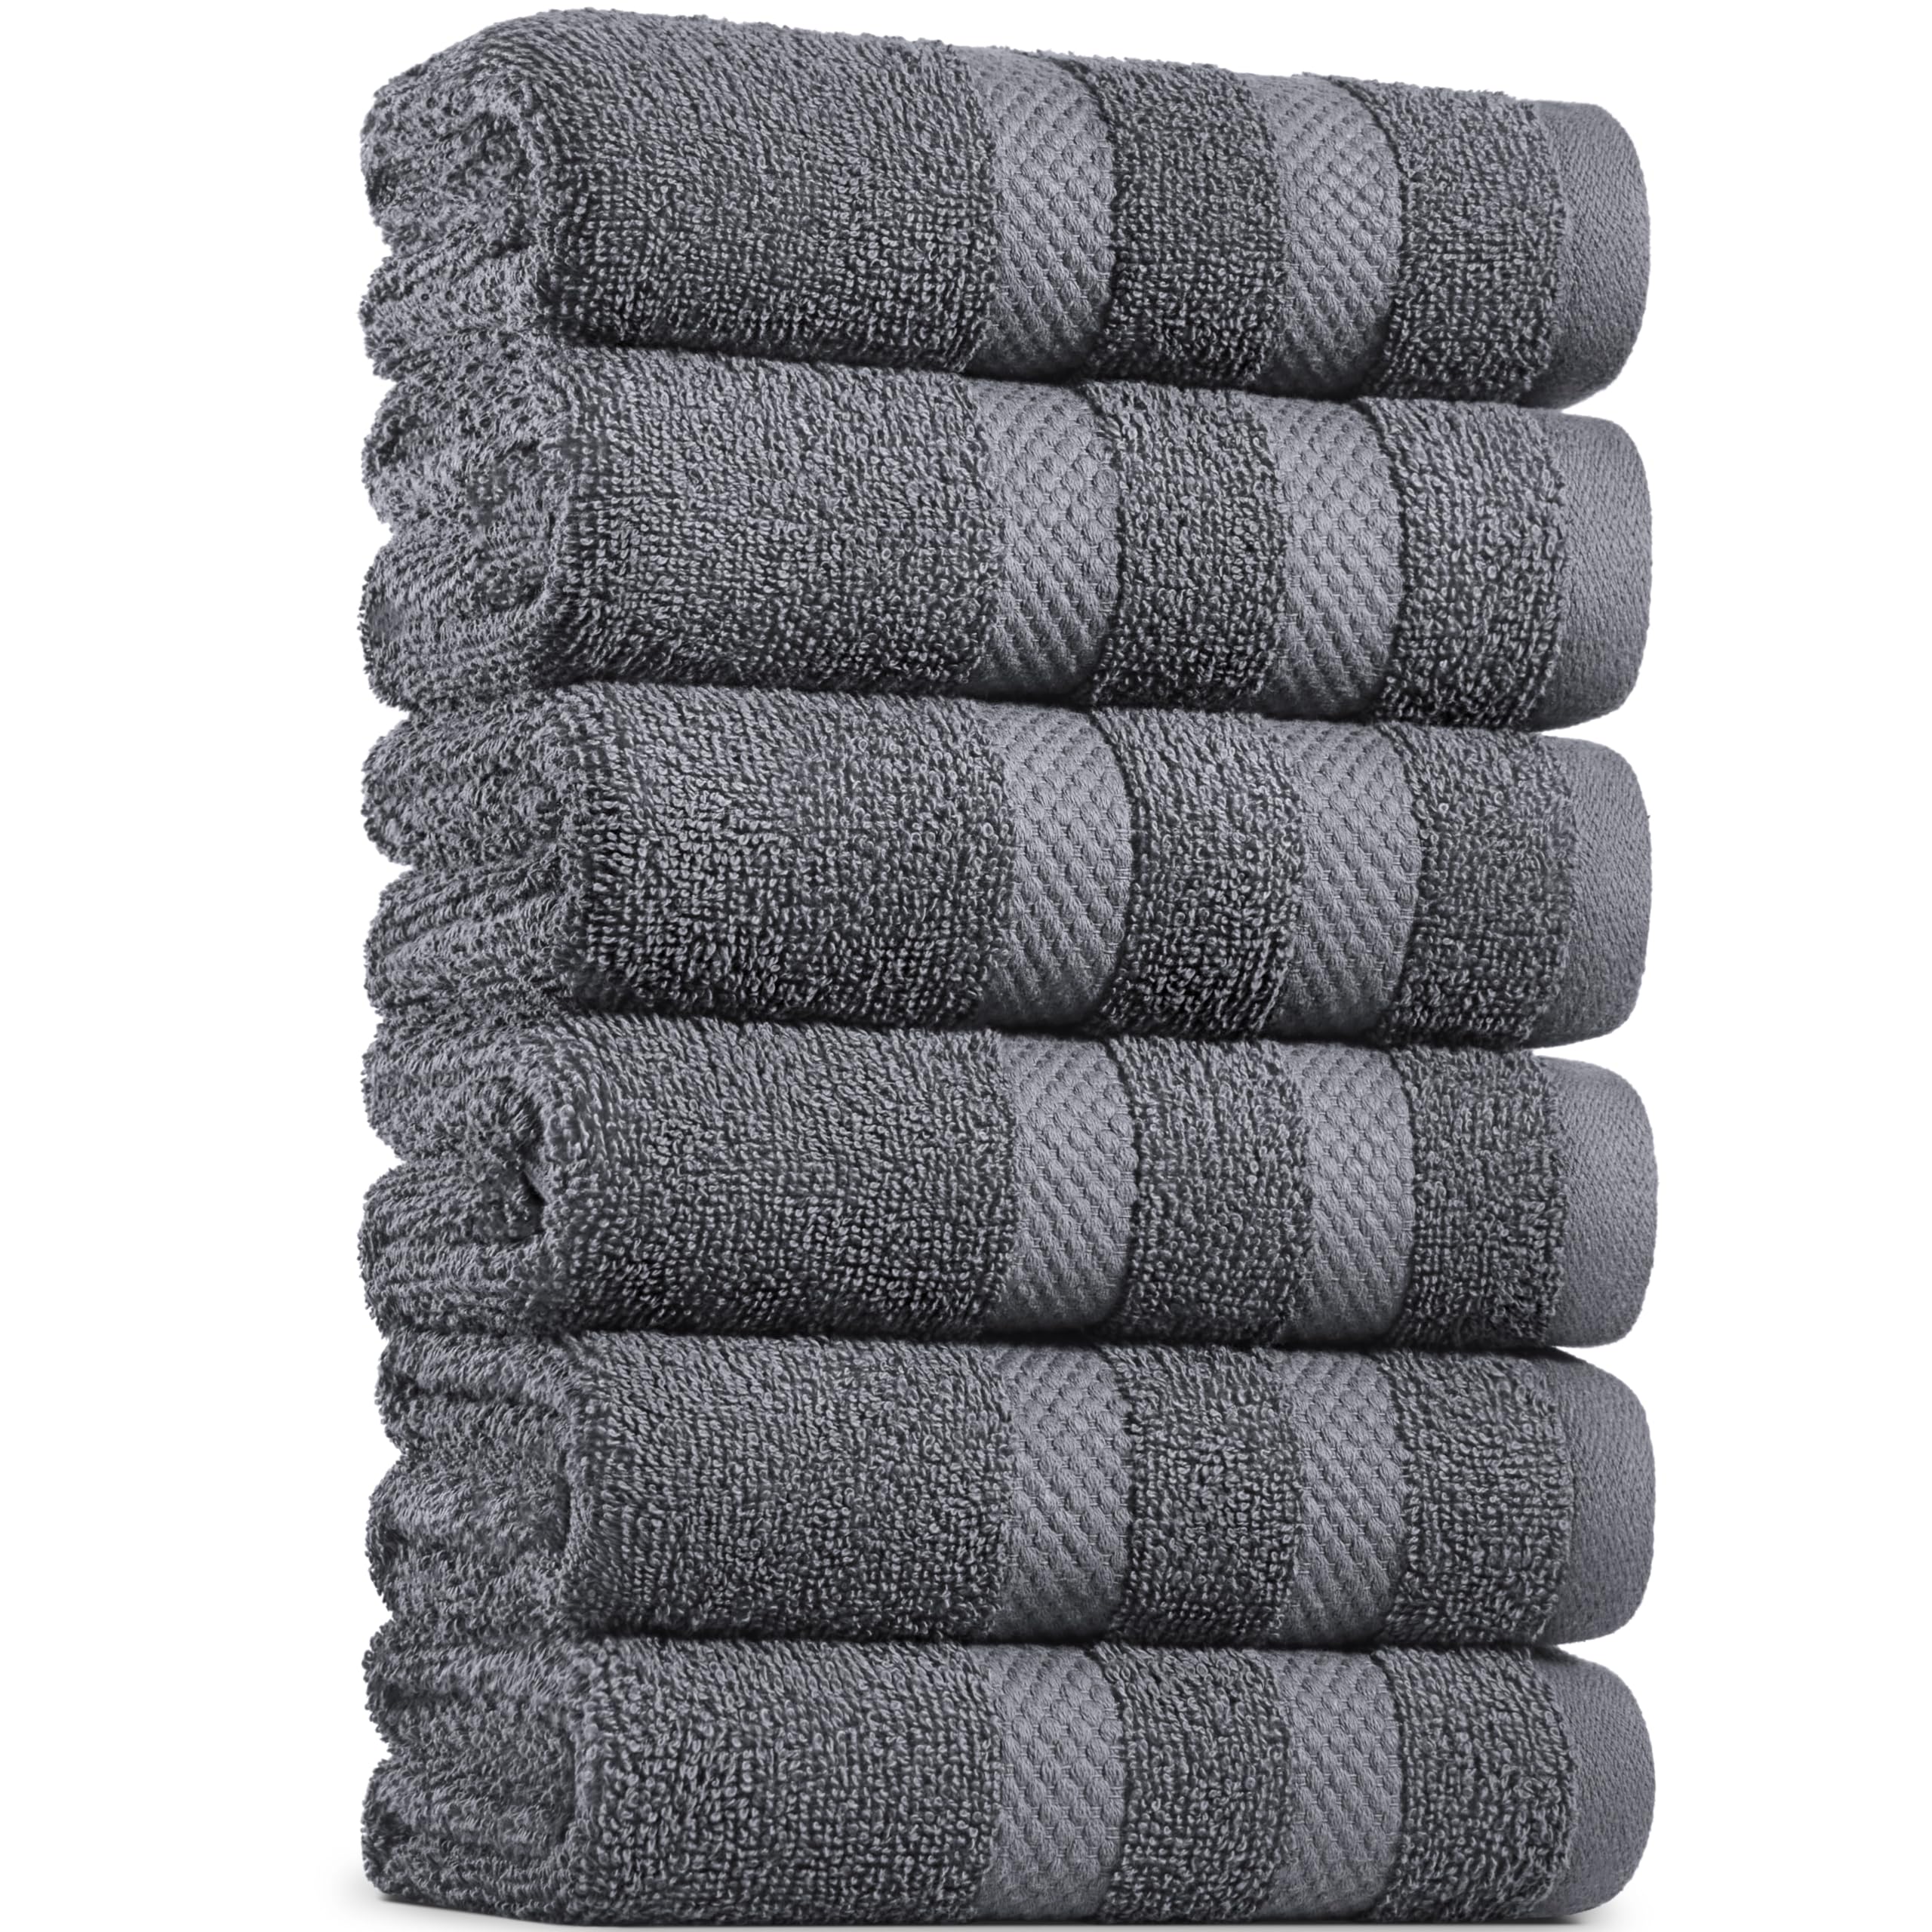 BELADOR Hand Towels 12-Pack - Premium Soft Cotton Hand Towels for Bathroom - Quick-Dry & Absorbent Hand Towel Set | White/Gray Hand Towels 16"x30"  - Like New